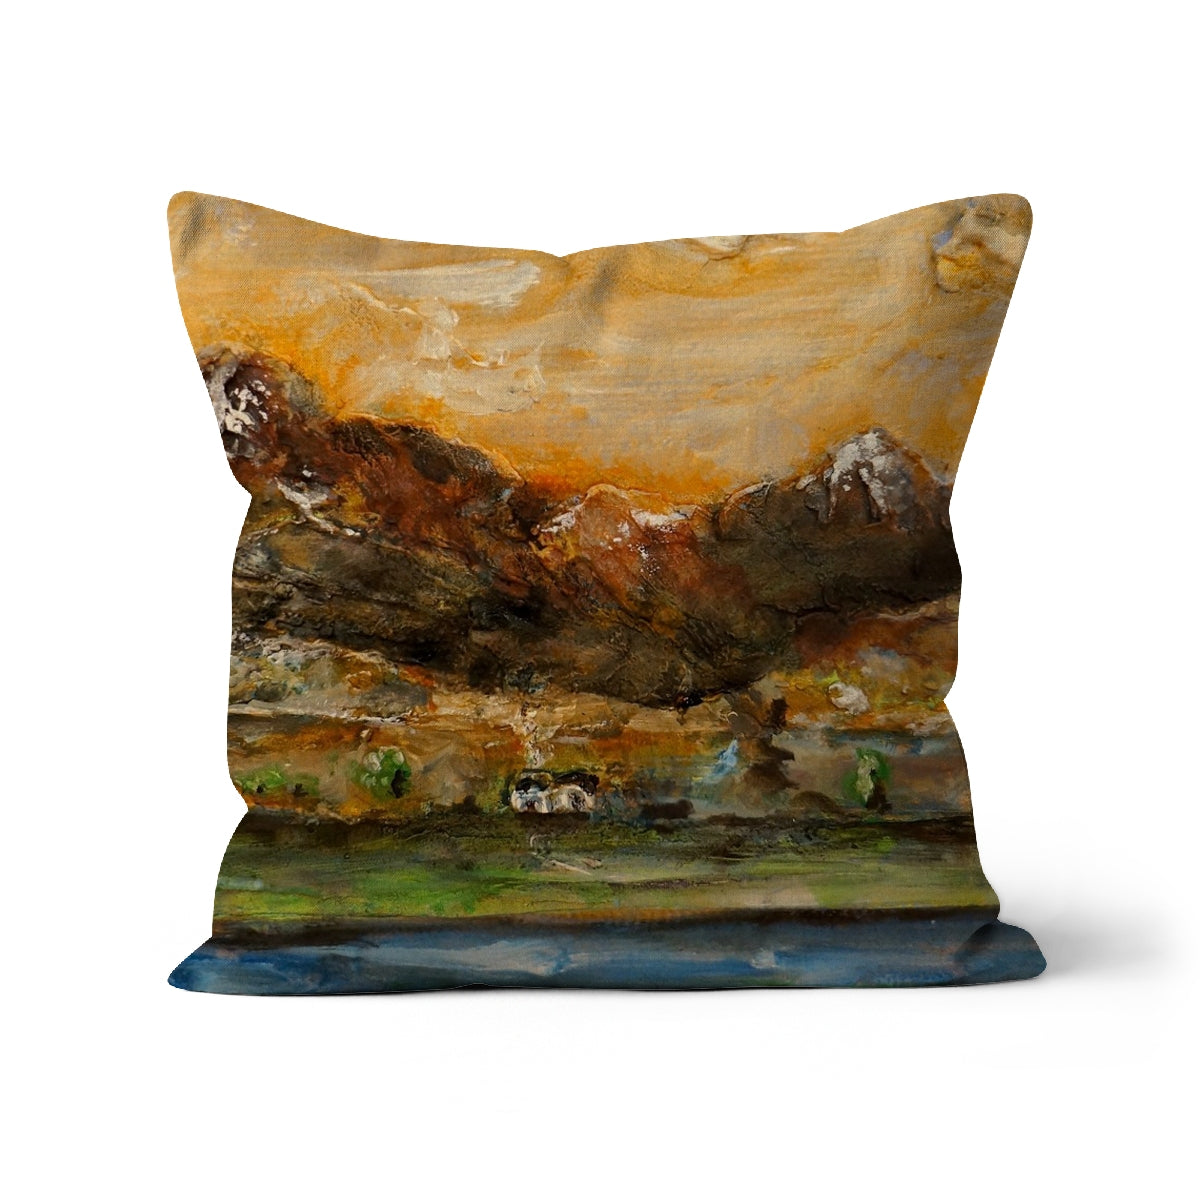 A Glencoe Cottage Art Gifts Cushion-Cushions-Glencoe Art Gallery-Linen-12"x12"-Paintings, Prints, Homeware, Art Gifts From Scotland By Scottish Artist Kevin Hunter